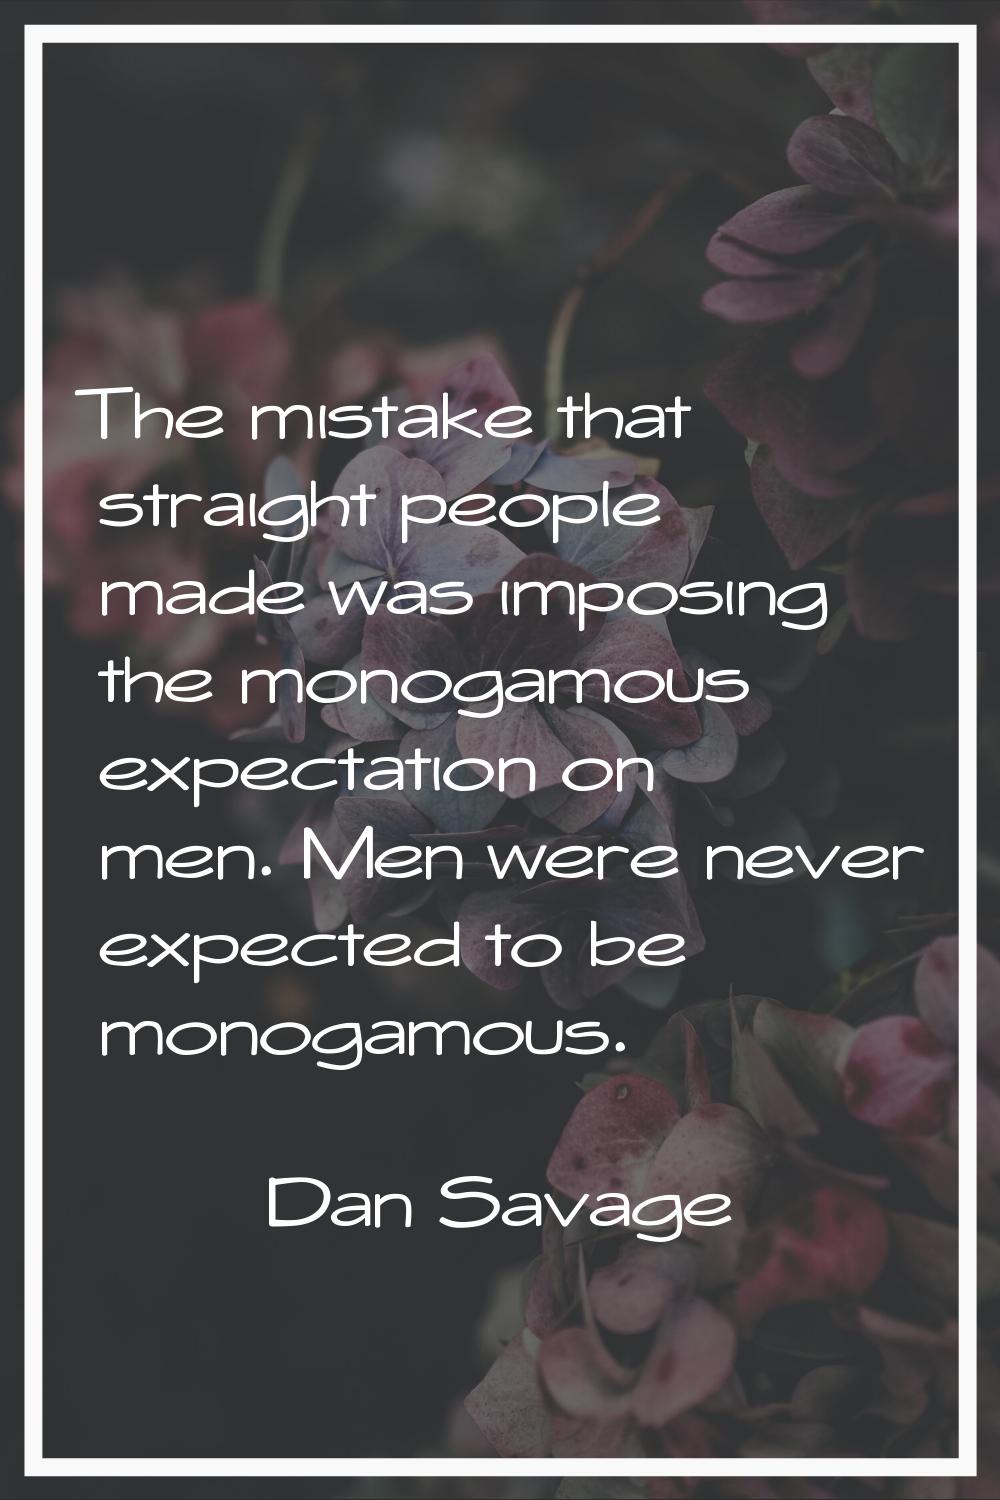 The mistake that straight people made was imposing the monogamous expectation on men. Men were neve